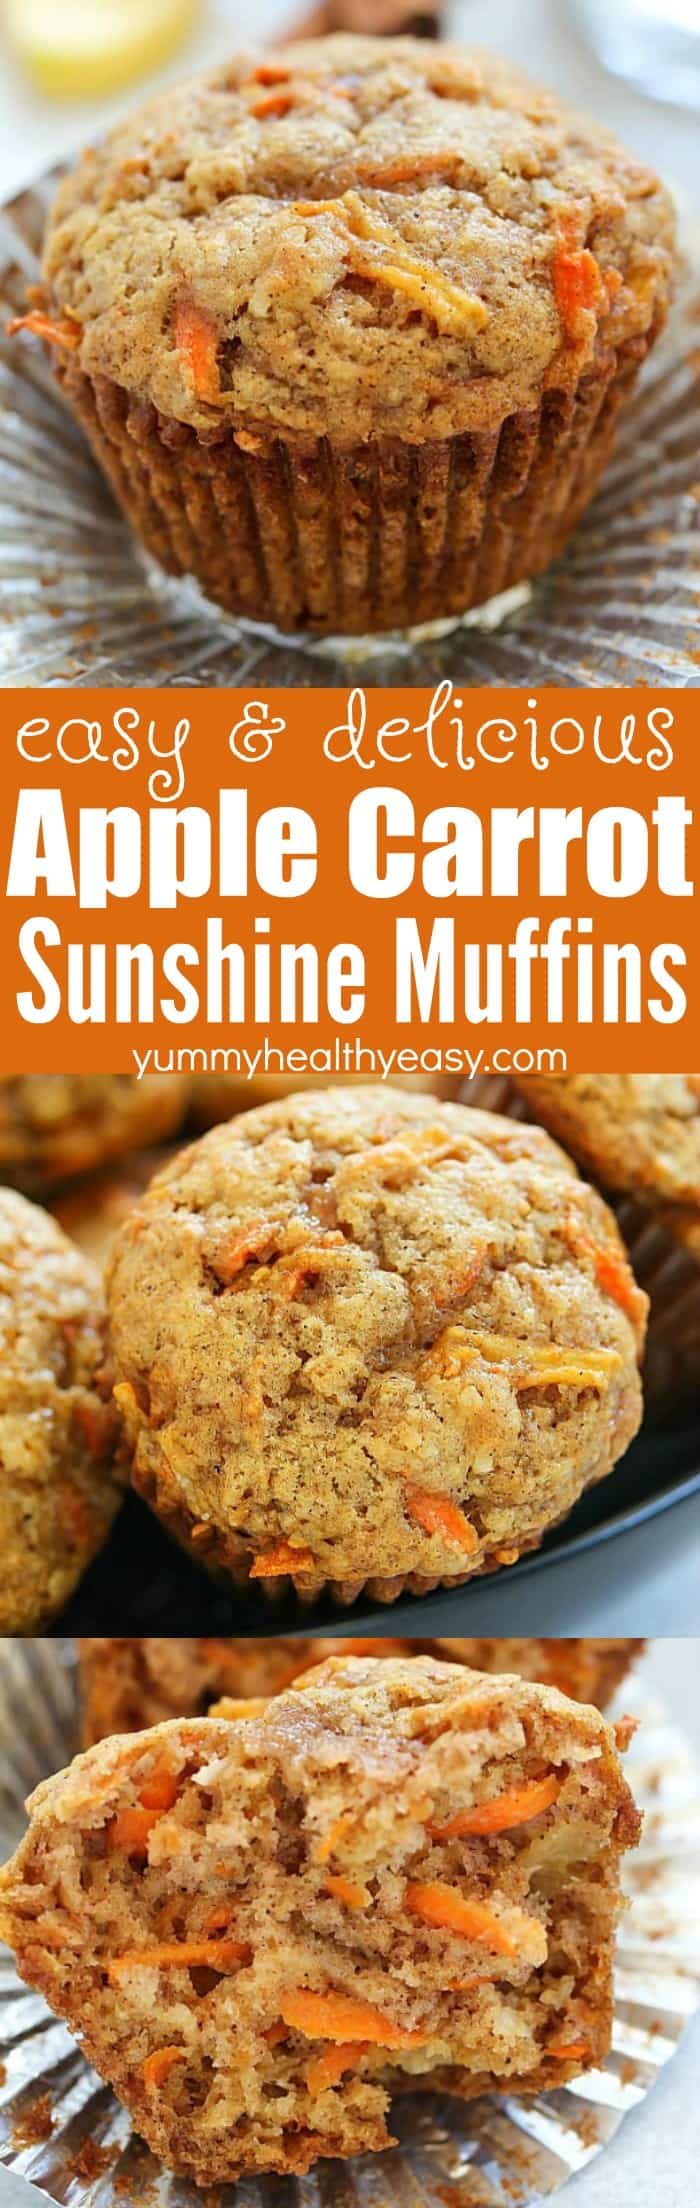 These Apple Carrot Muffins (also known as Sunshine Muffins) are full of carrots, apples, coconut, cinnamon & nutmeg. Your house will smell amazing after baking a batch of them! They're easy to make and are so fluffy and delicious, they'll quickly become a family favorite! via @jennikolaus